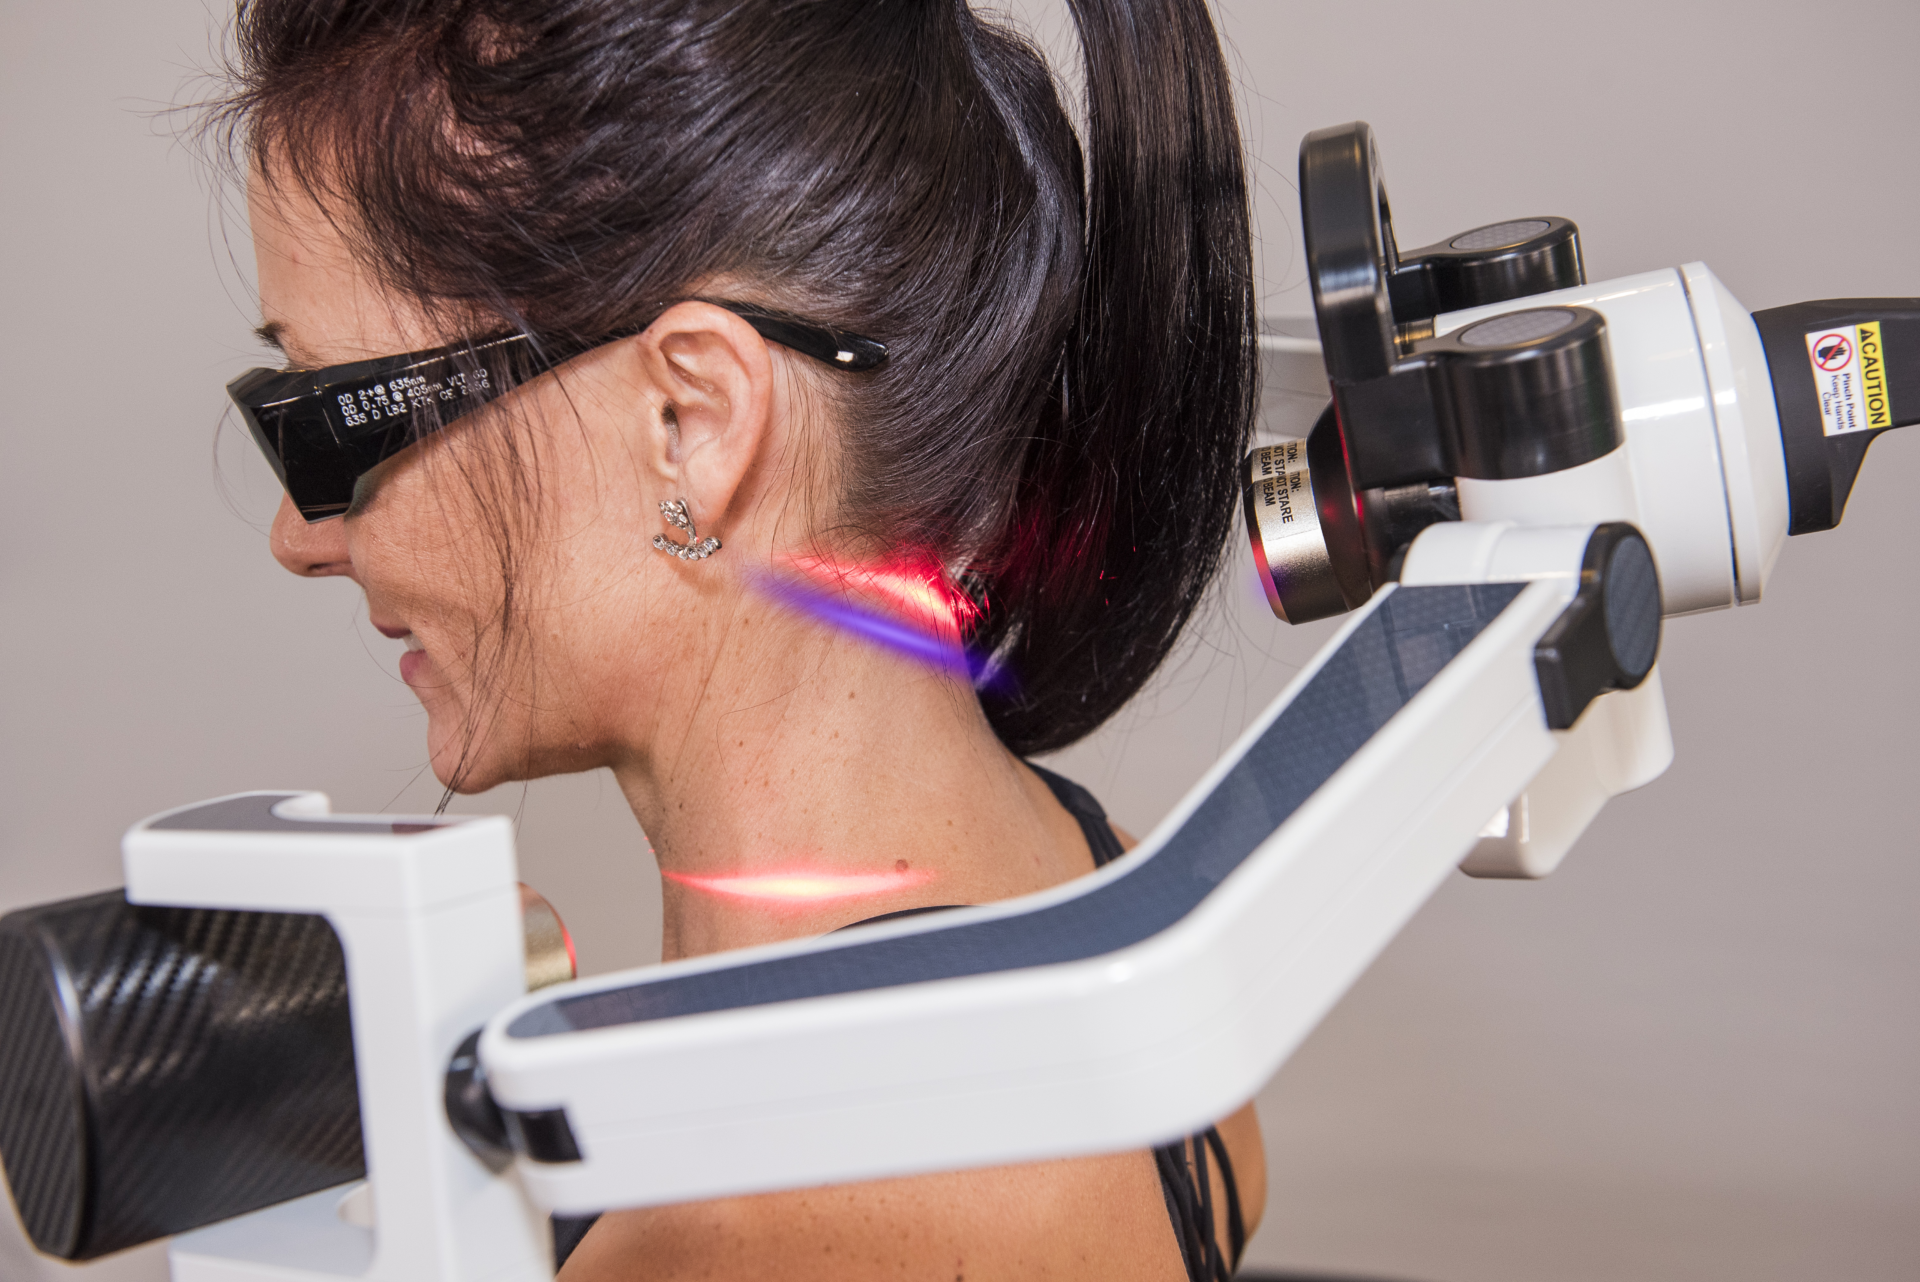 FX 405 cold laser being used on the back of a woman's neck